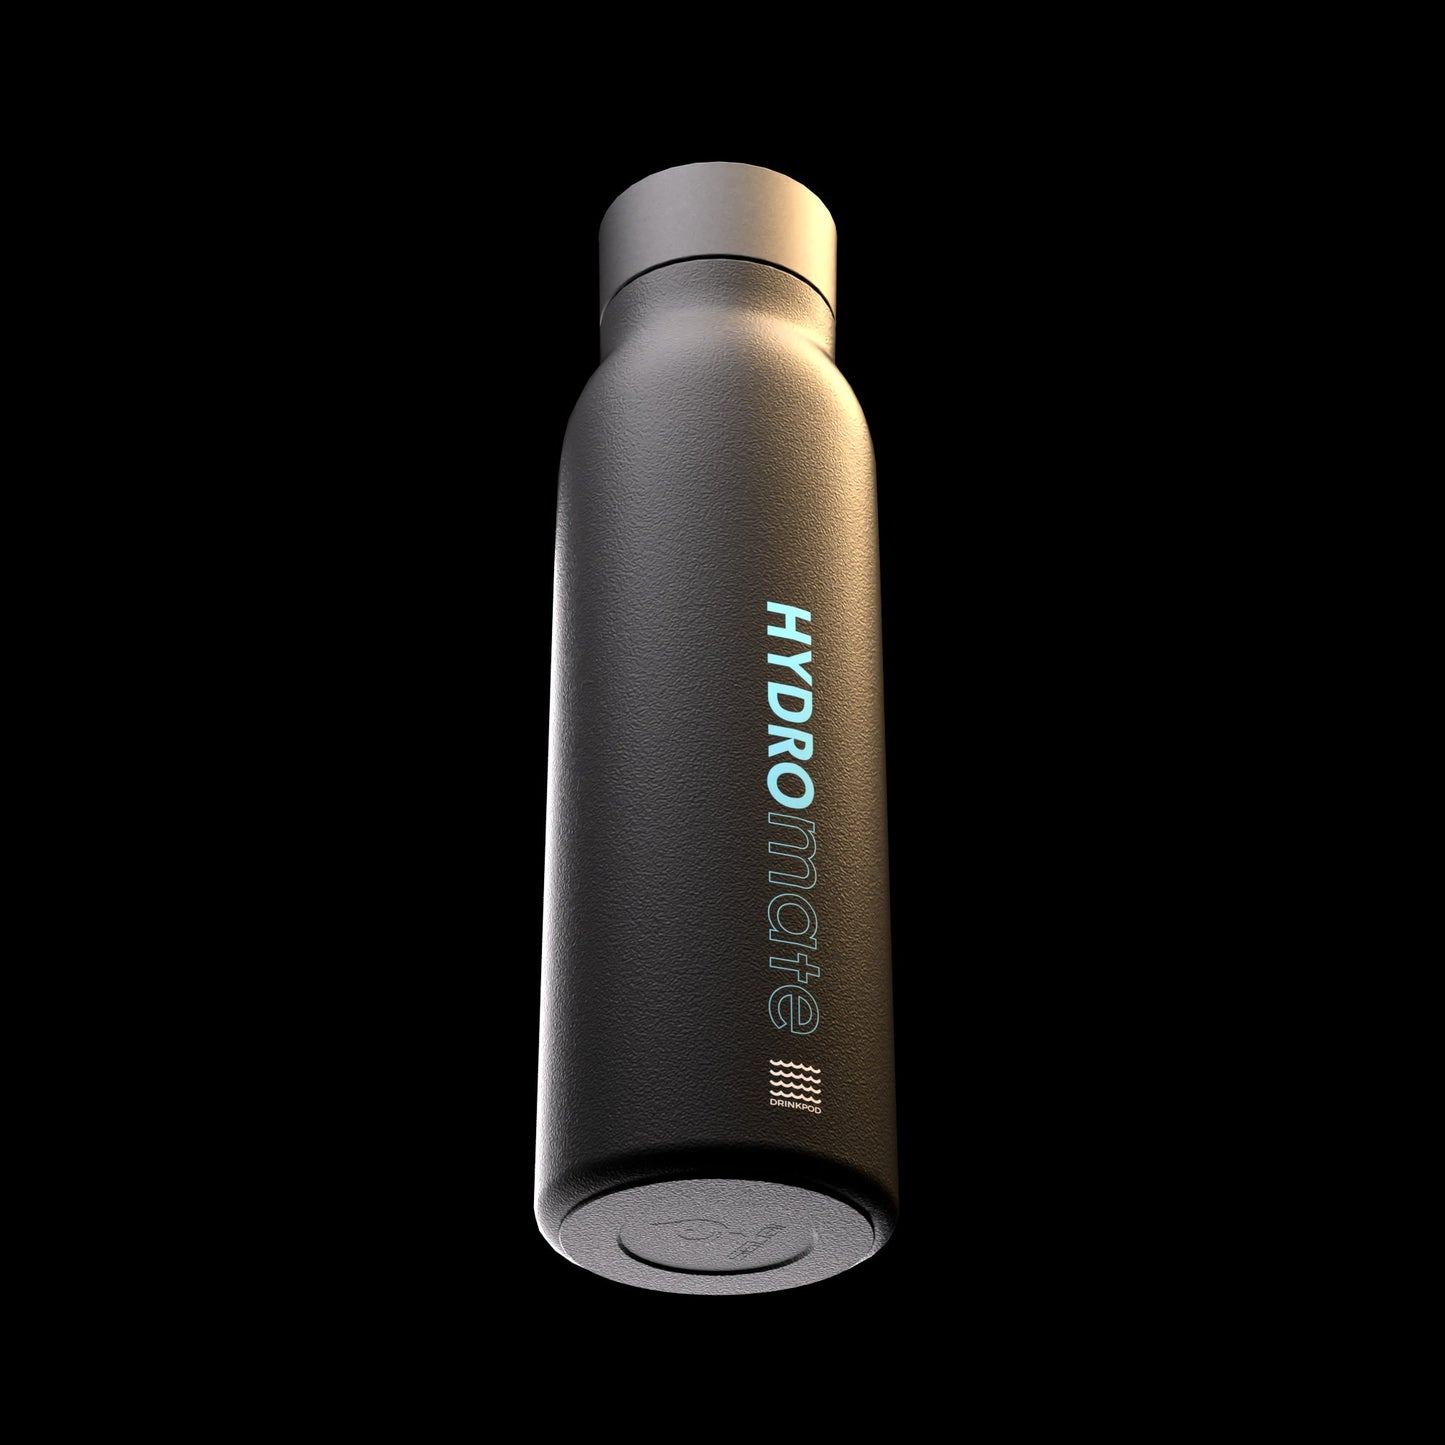 Hydromate 20 oz Black Stainless Steel Vacuum Insulated Hydration Water Bottle With Tracking App and Reminder Settings by Drinkpod